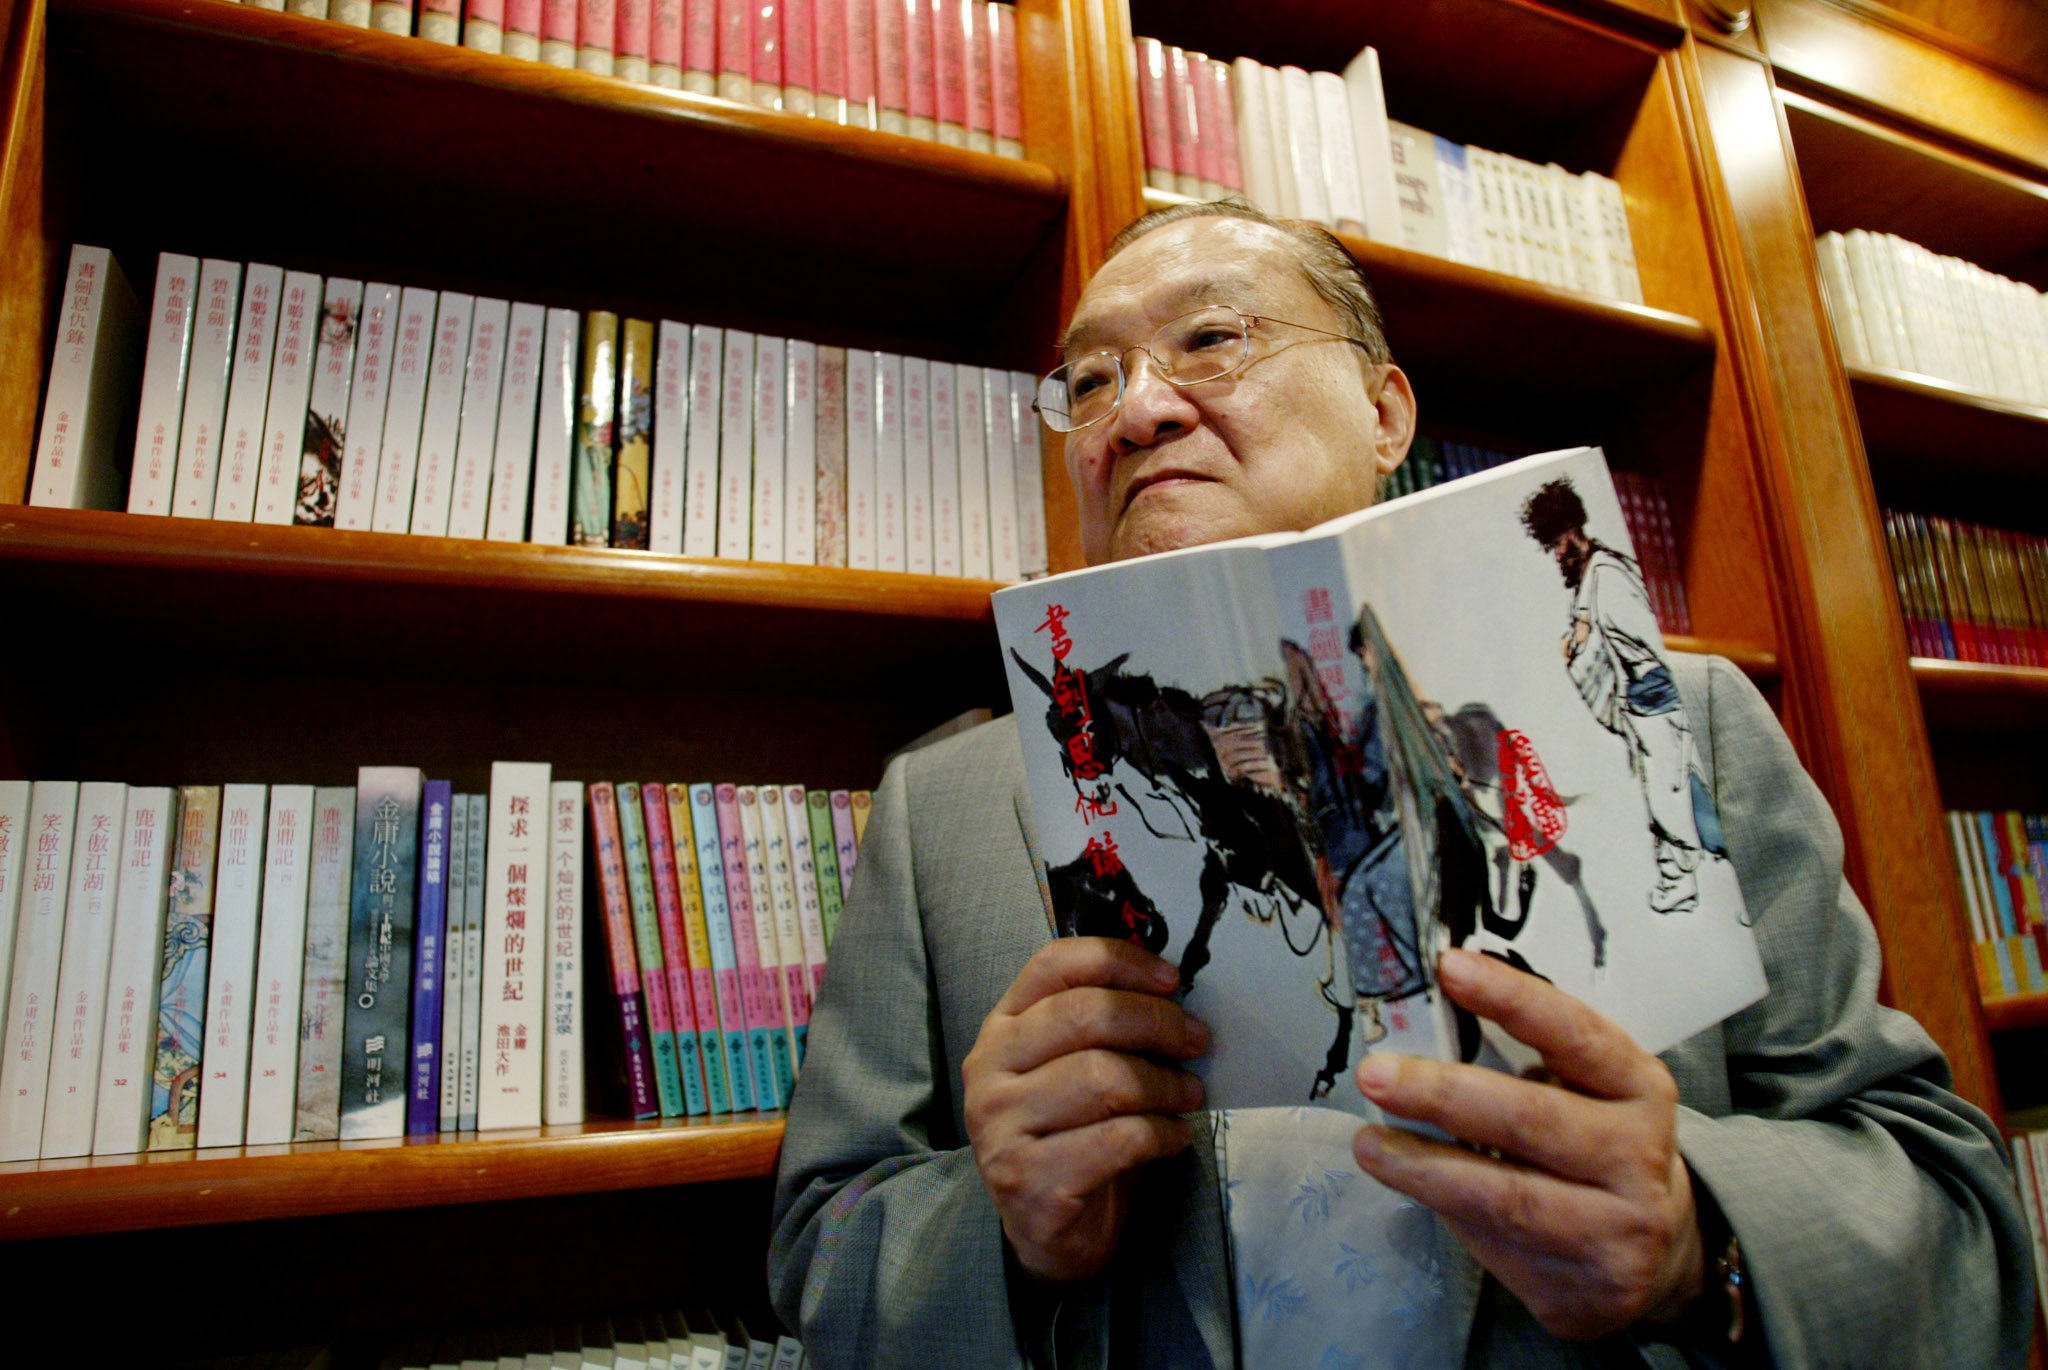 Hong Kong wuxia author Louis Cha Leung-yung, known by his pen name Jin Yong, holds a copy of his novel “Book and Sword, Gratitude and Revenge” at his office in the city on July 29, 2002. Photo: Reuters